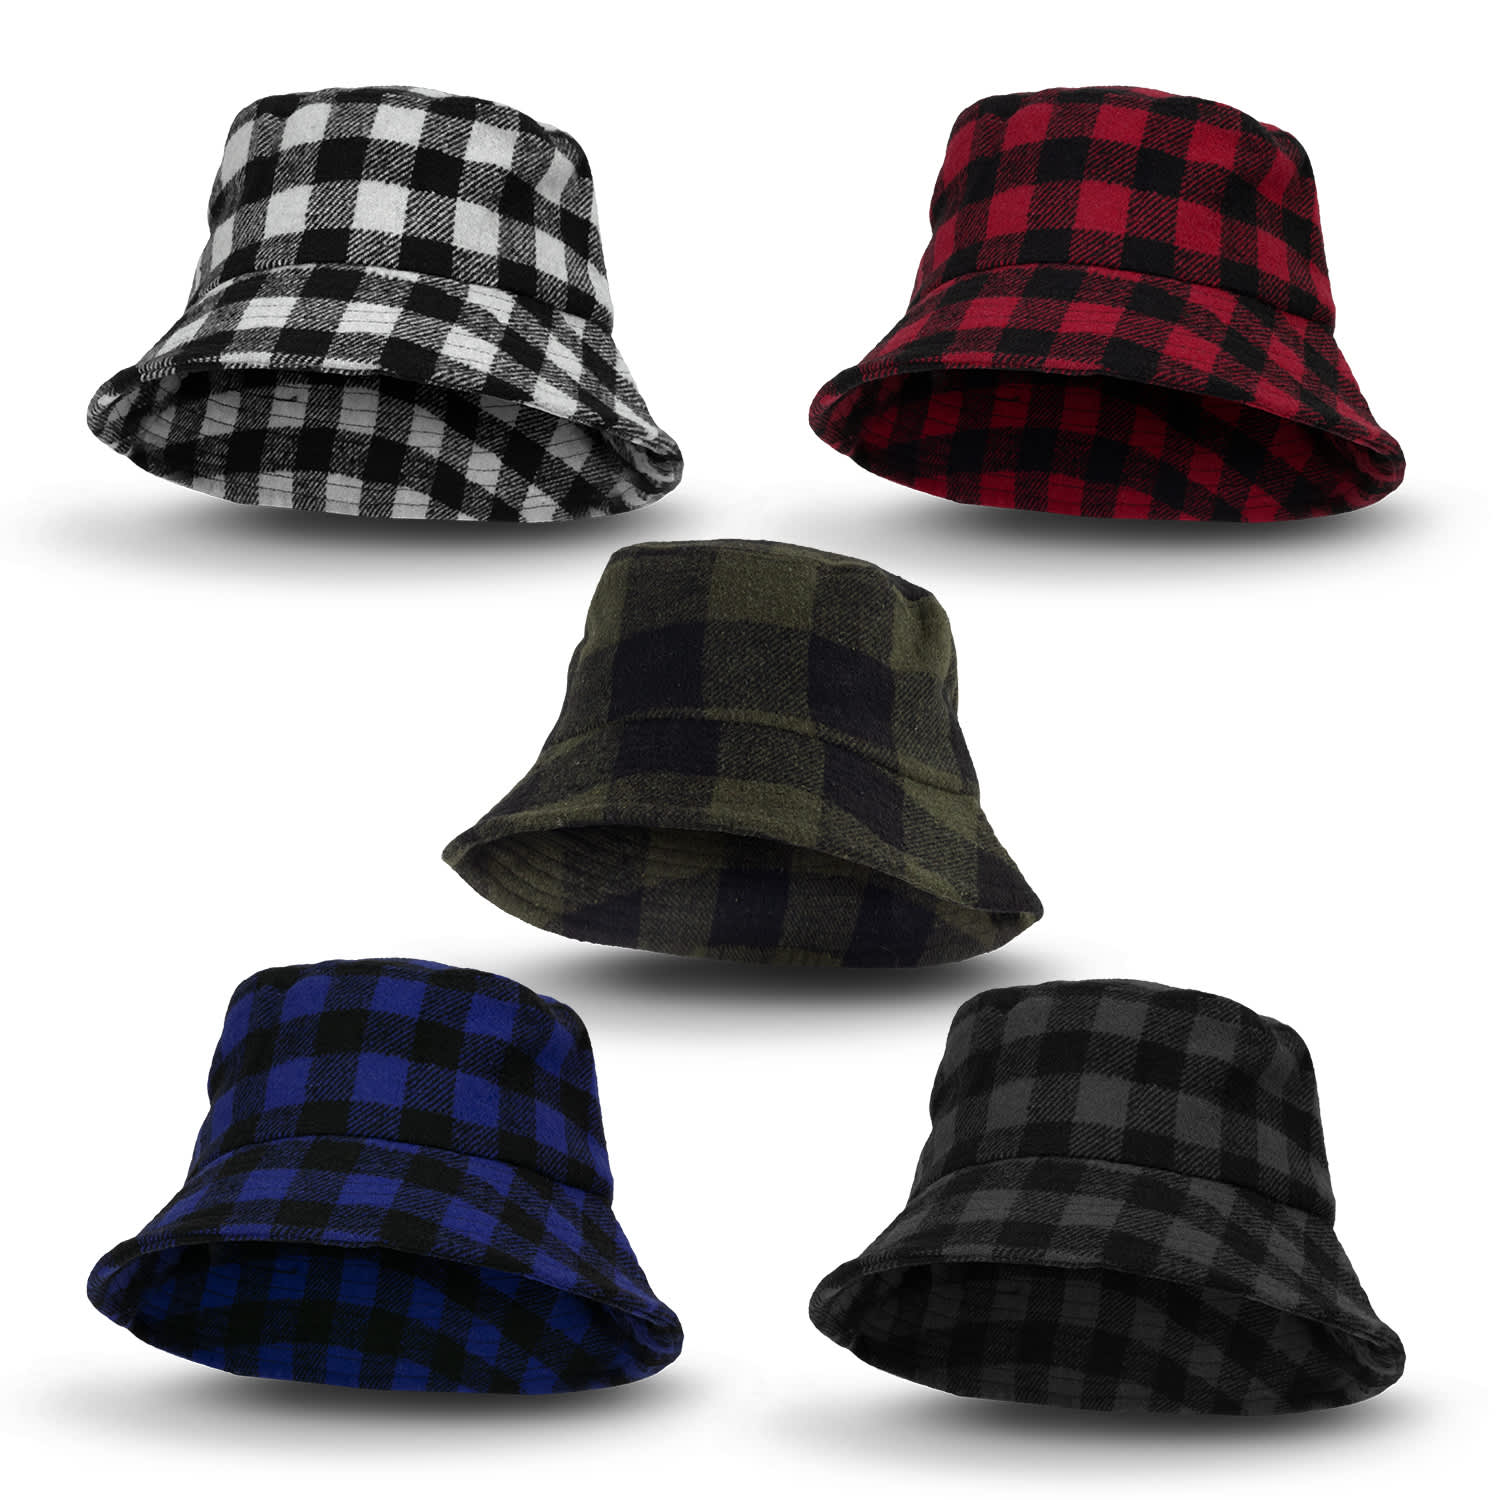 Fiordland Bucket Hat | Towel Bucket Hat | Towelling Bucket Hat NZ | Bucket Hats NZ | Custom Bucket Hats | Customised Bucket Hats | Personalised Bucket Hats | Custom Merchandise | Merchandise | Customised Gifts NZ | Corporate Gifts | Promotional Products